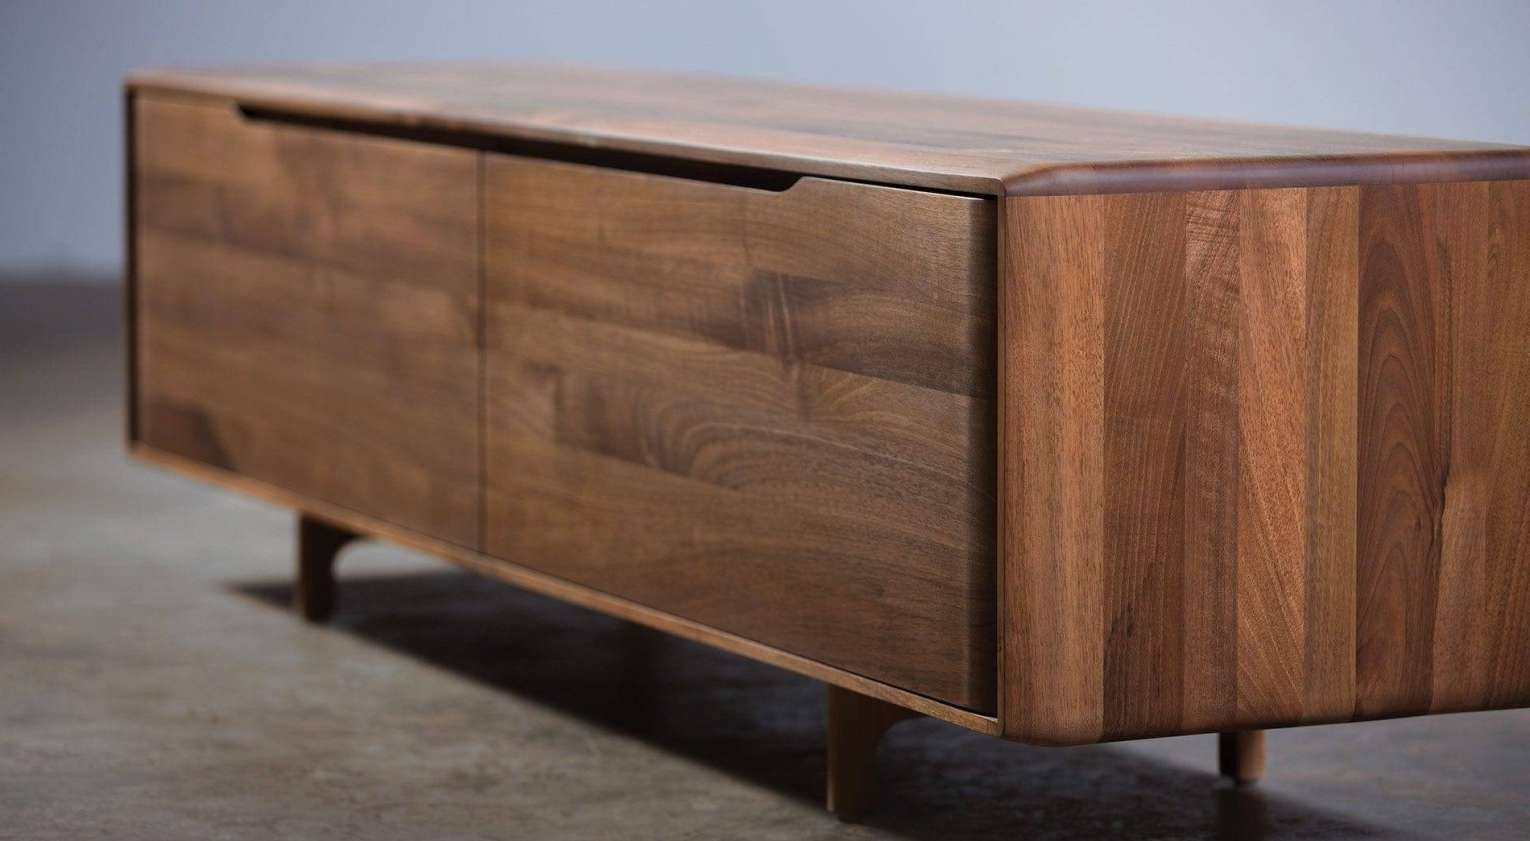 Sideboard : Modern Sideboards Furniture Amazing Contemporary In Modern Sideboards (View 9 of 20)